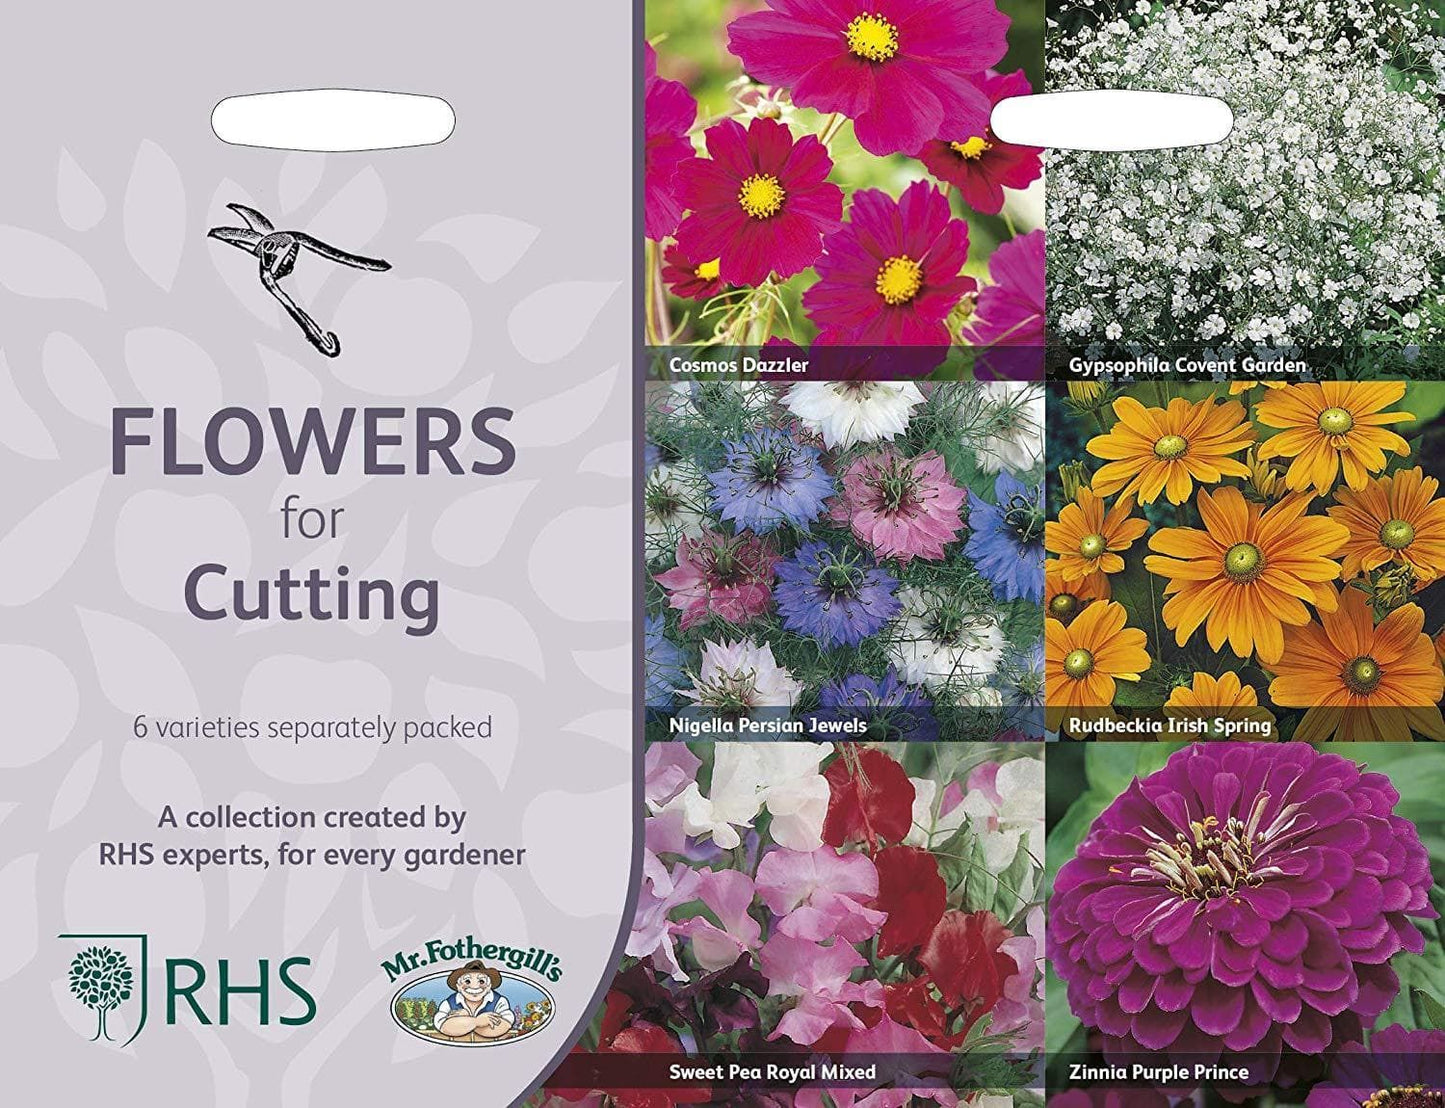 Mr Fothergills RHS Flowers For Cutting Collection - Seeds